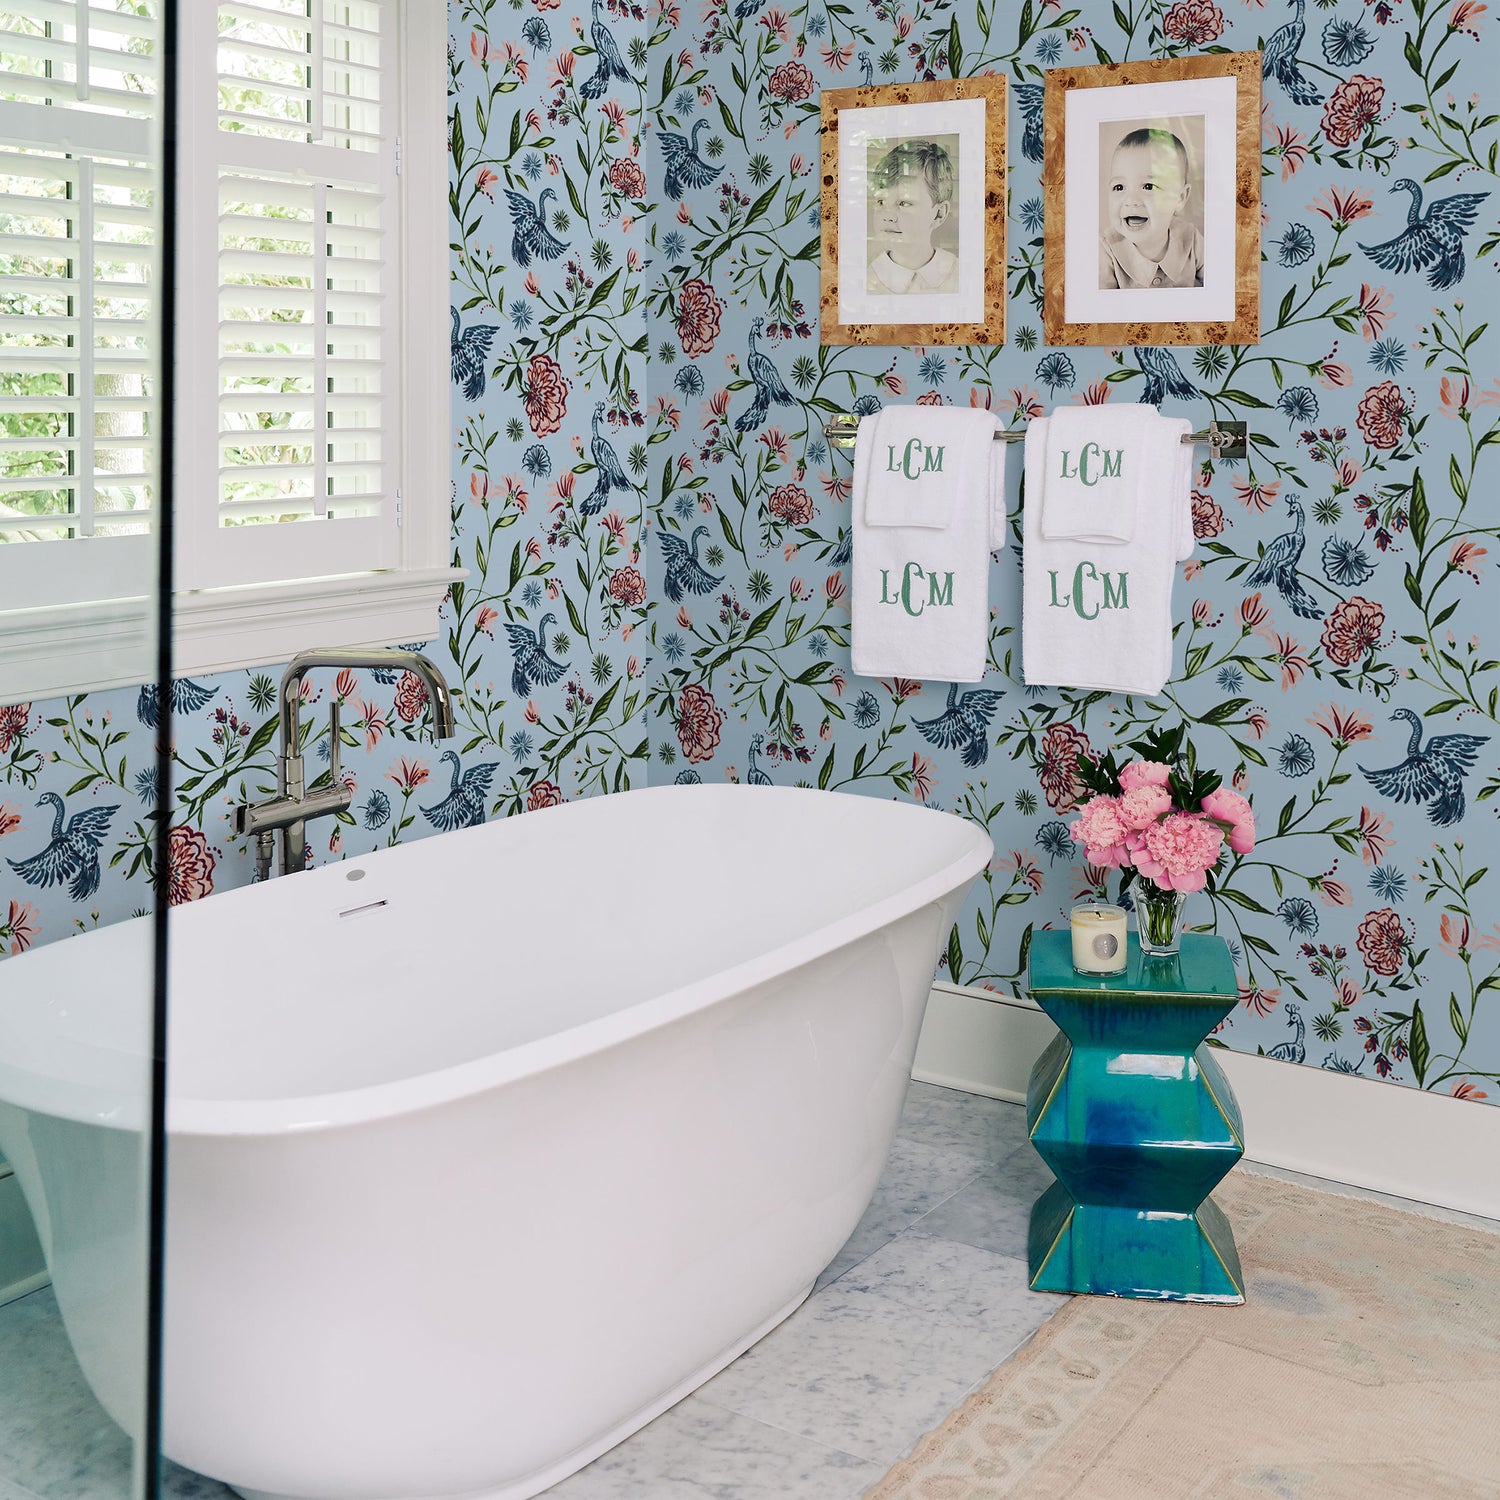 Bathroom styled with Blue Chinoiserie printed wallpaper with white tub in front next to blue metallic small table with pink flowers in vase and candle on top below white monogrammed towels hanging from metal rod and two picture frames on top